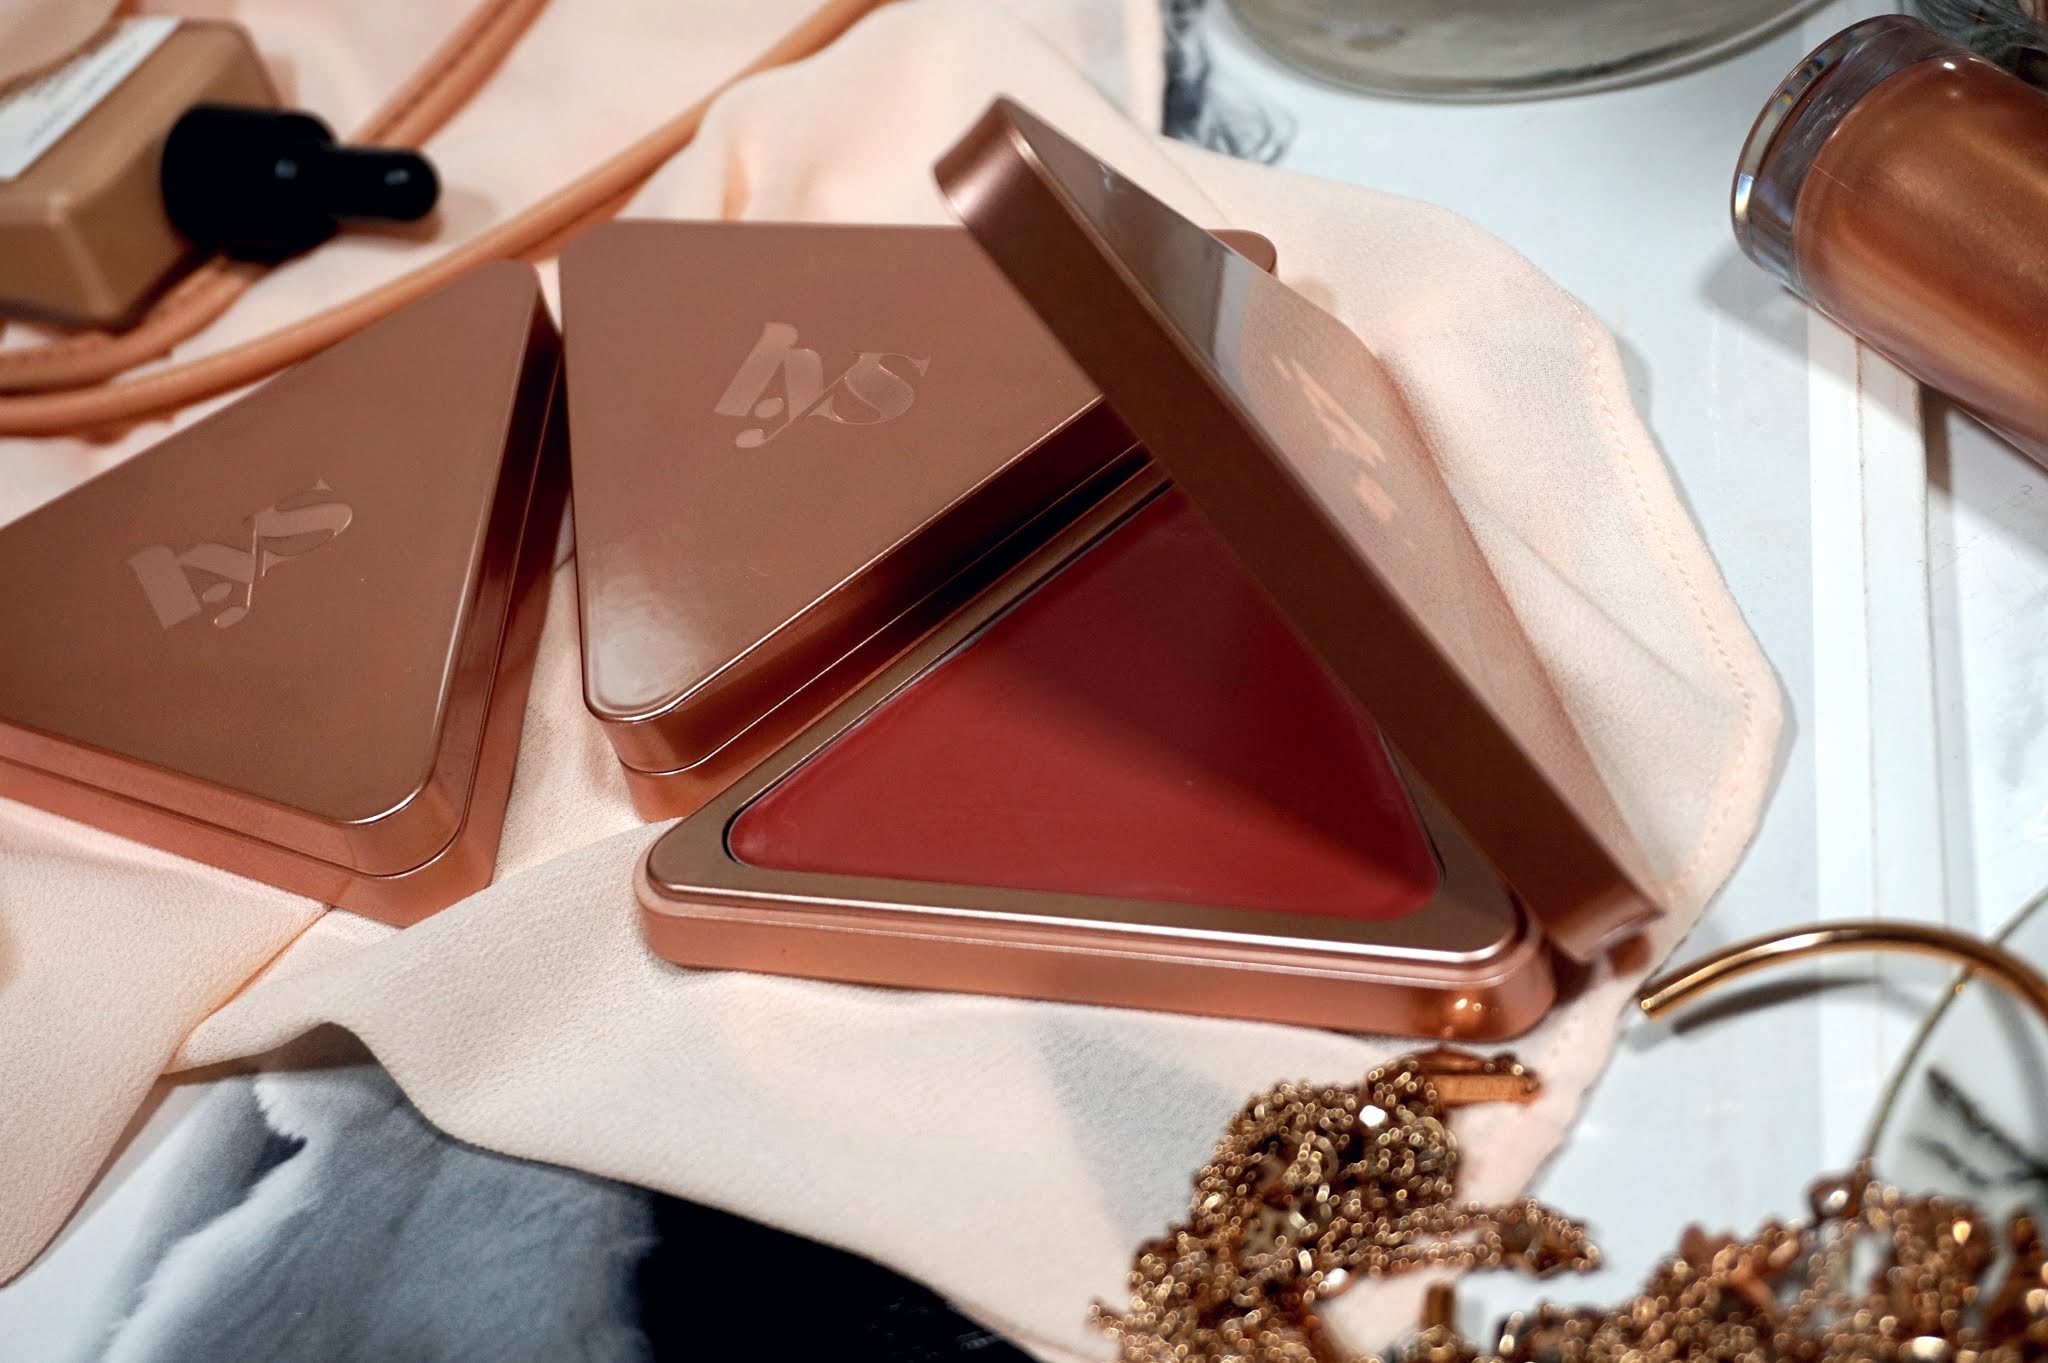 LYS Beauty Higher Standard Satin Matte Cream Blush Review and Swatches